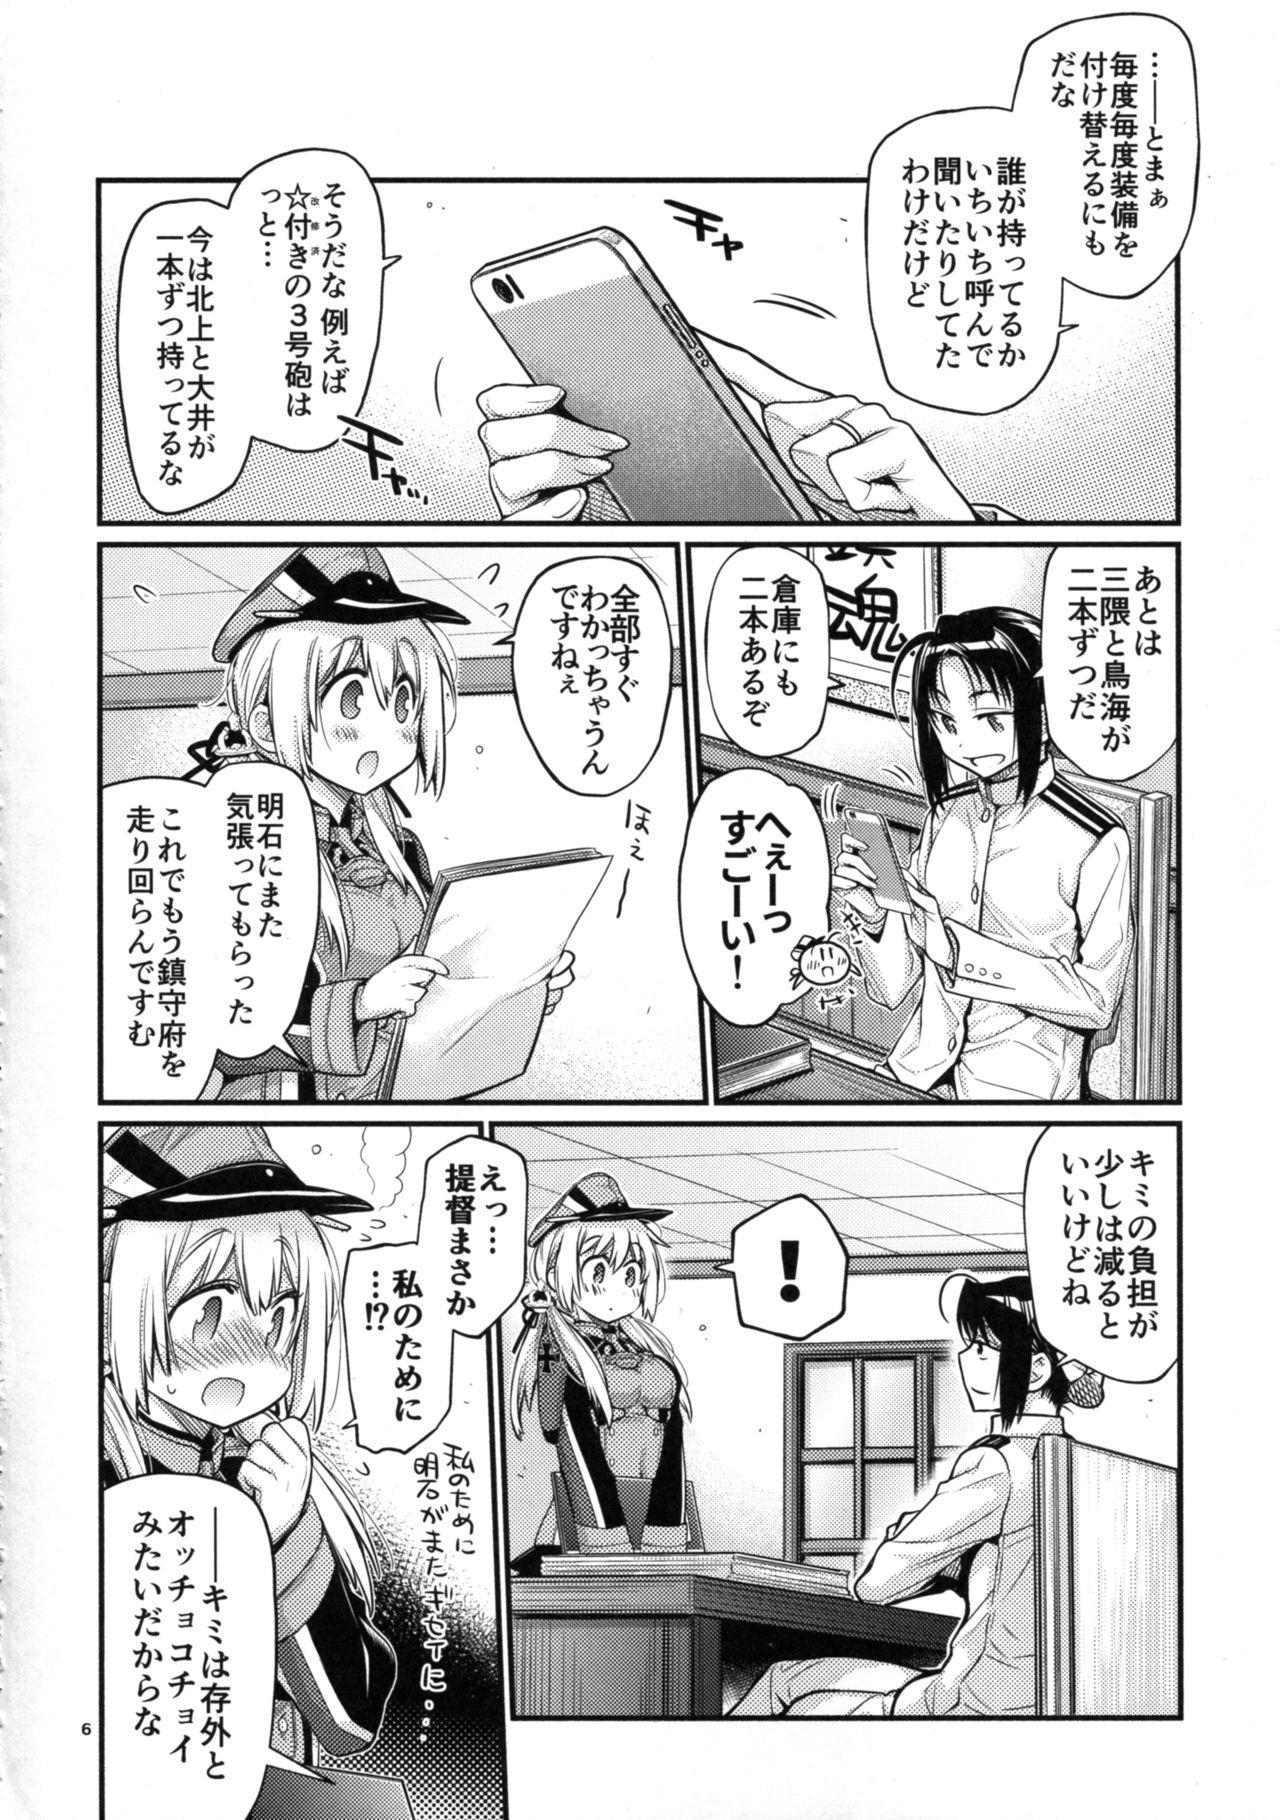 Sexcam Prinz Pudding 4 - Kantai collection Inked - Page 6